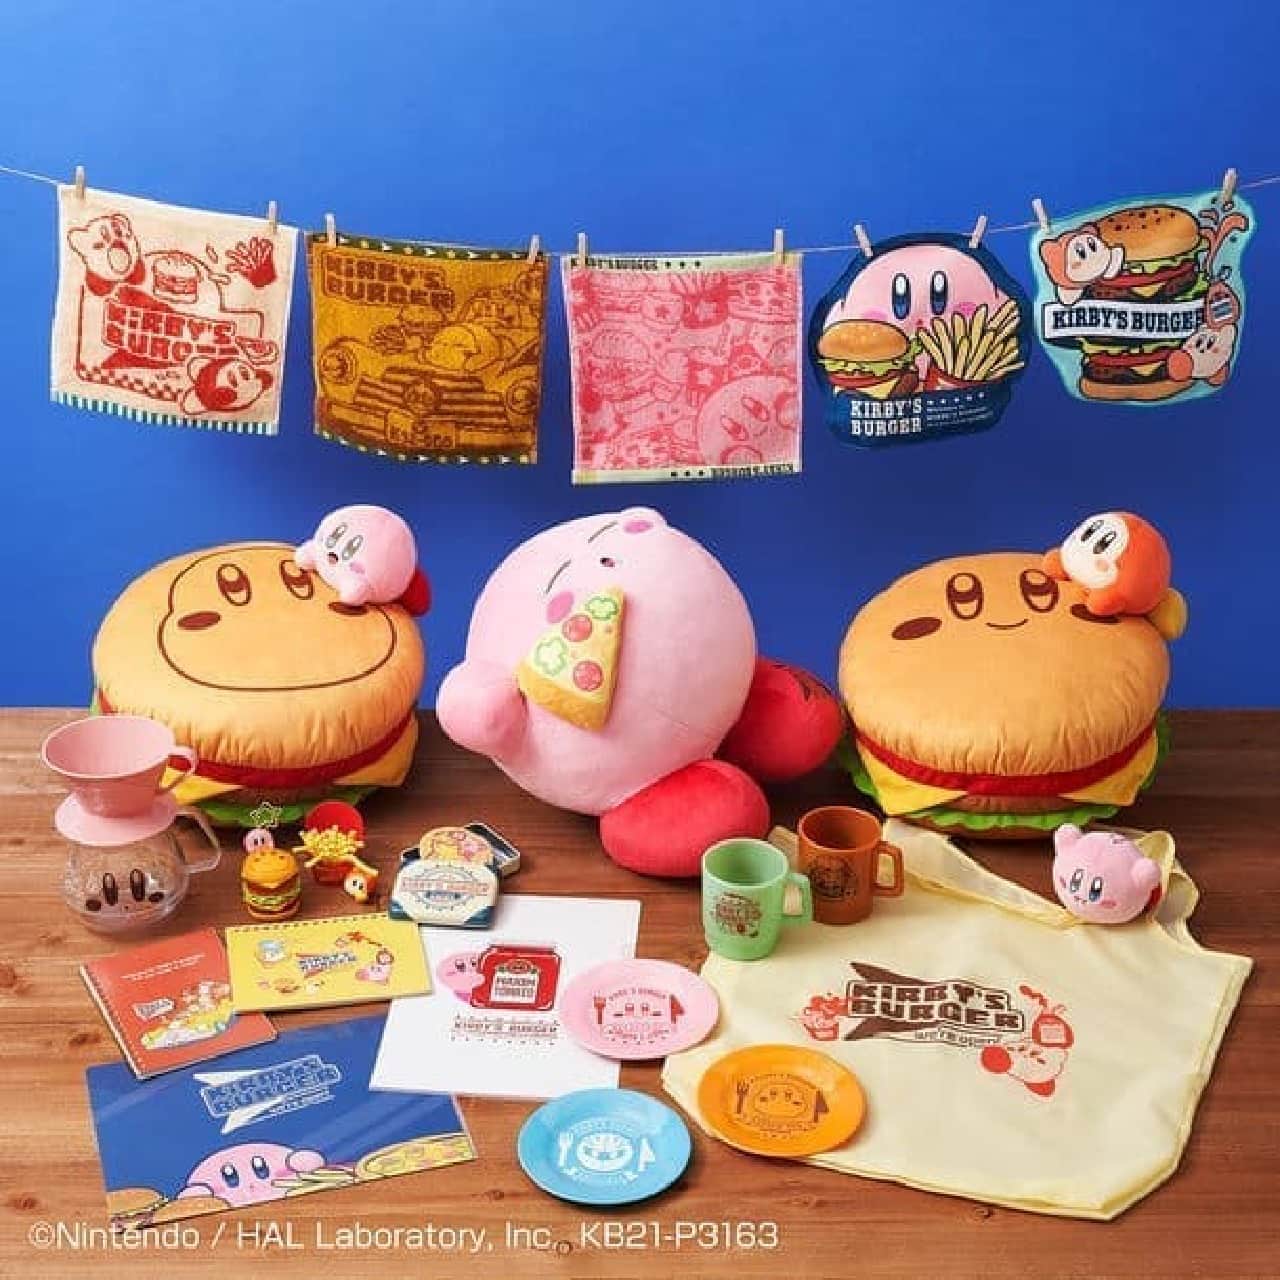 "Ichiban Kuji Kirby's Dream Land KIRBY'S BURGER" is now available--Hit a burger-shaped cushion figure, etc.